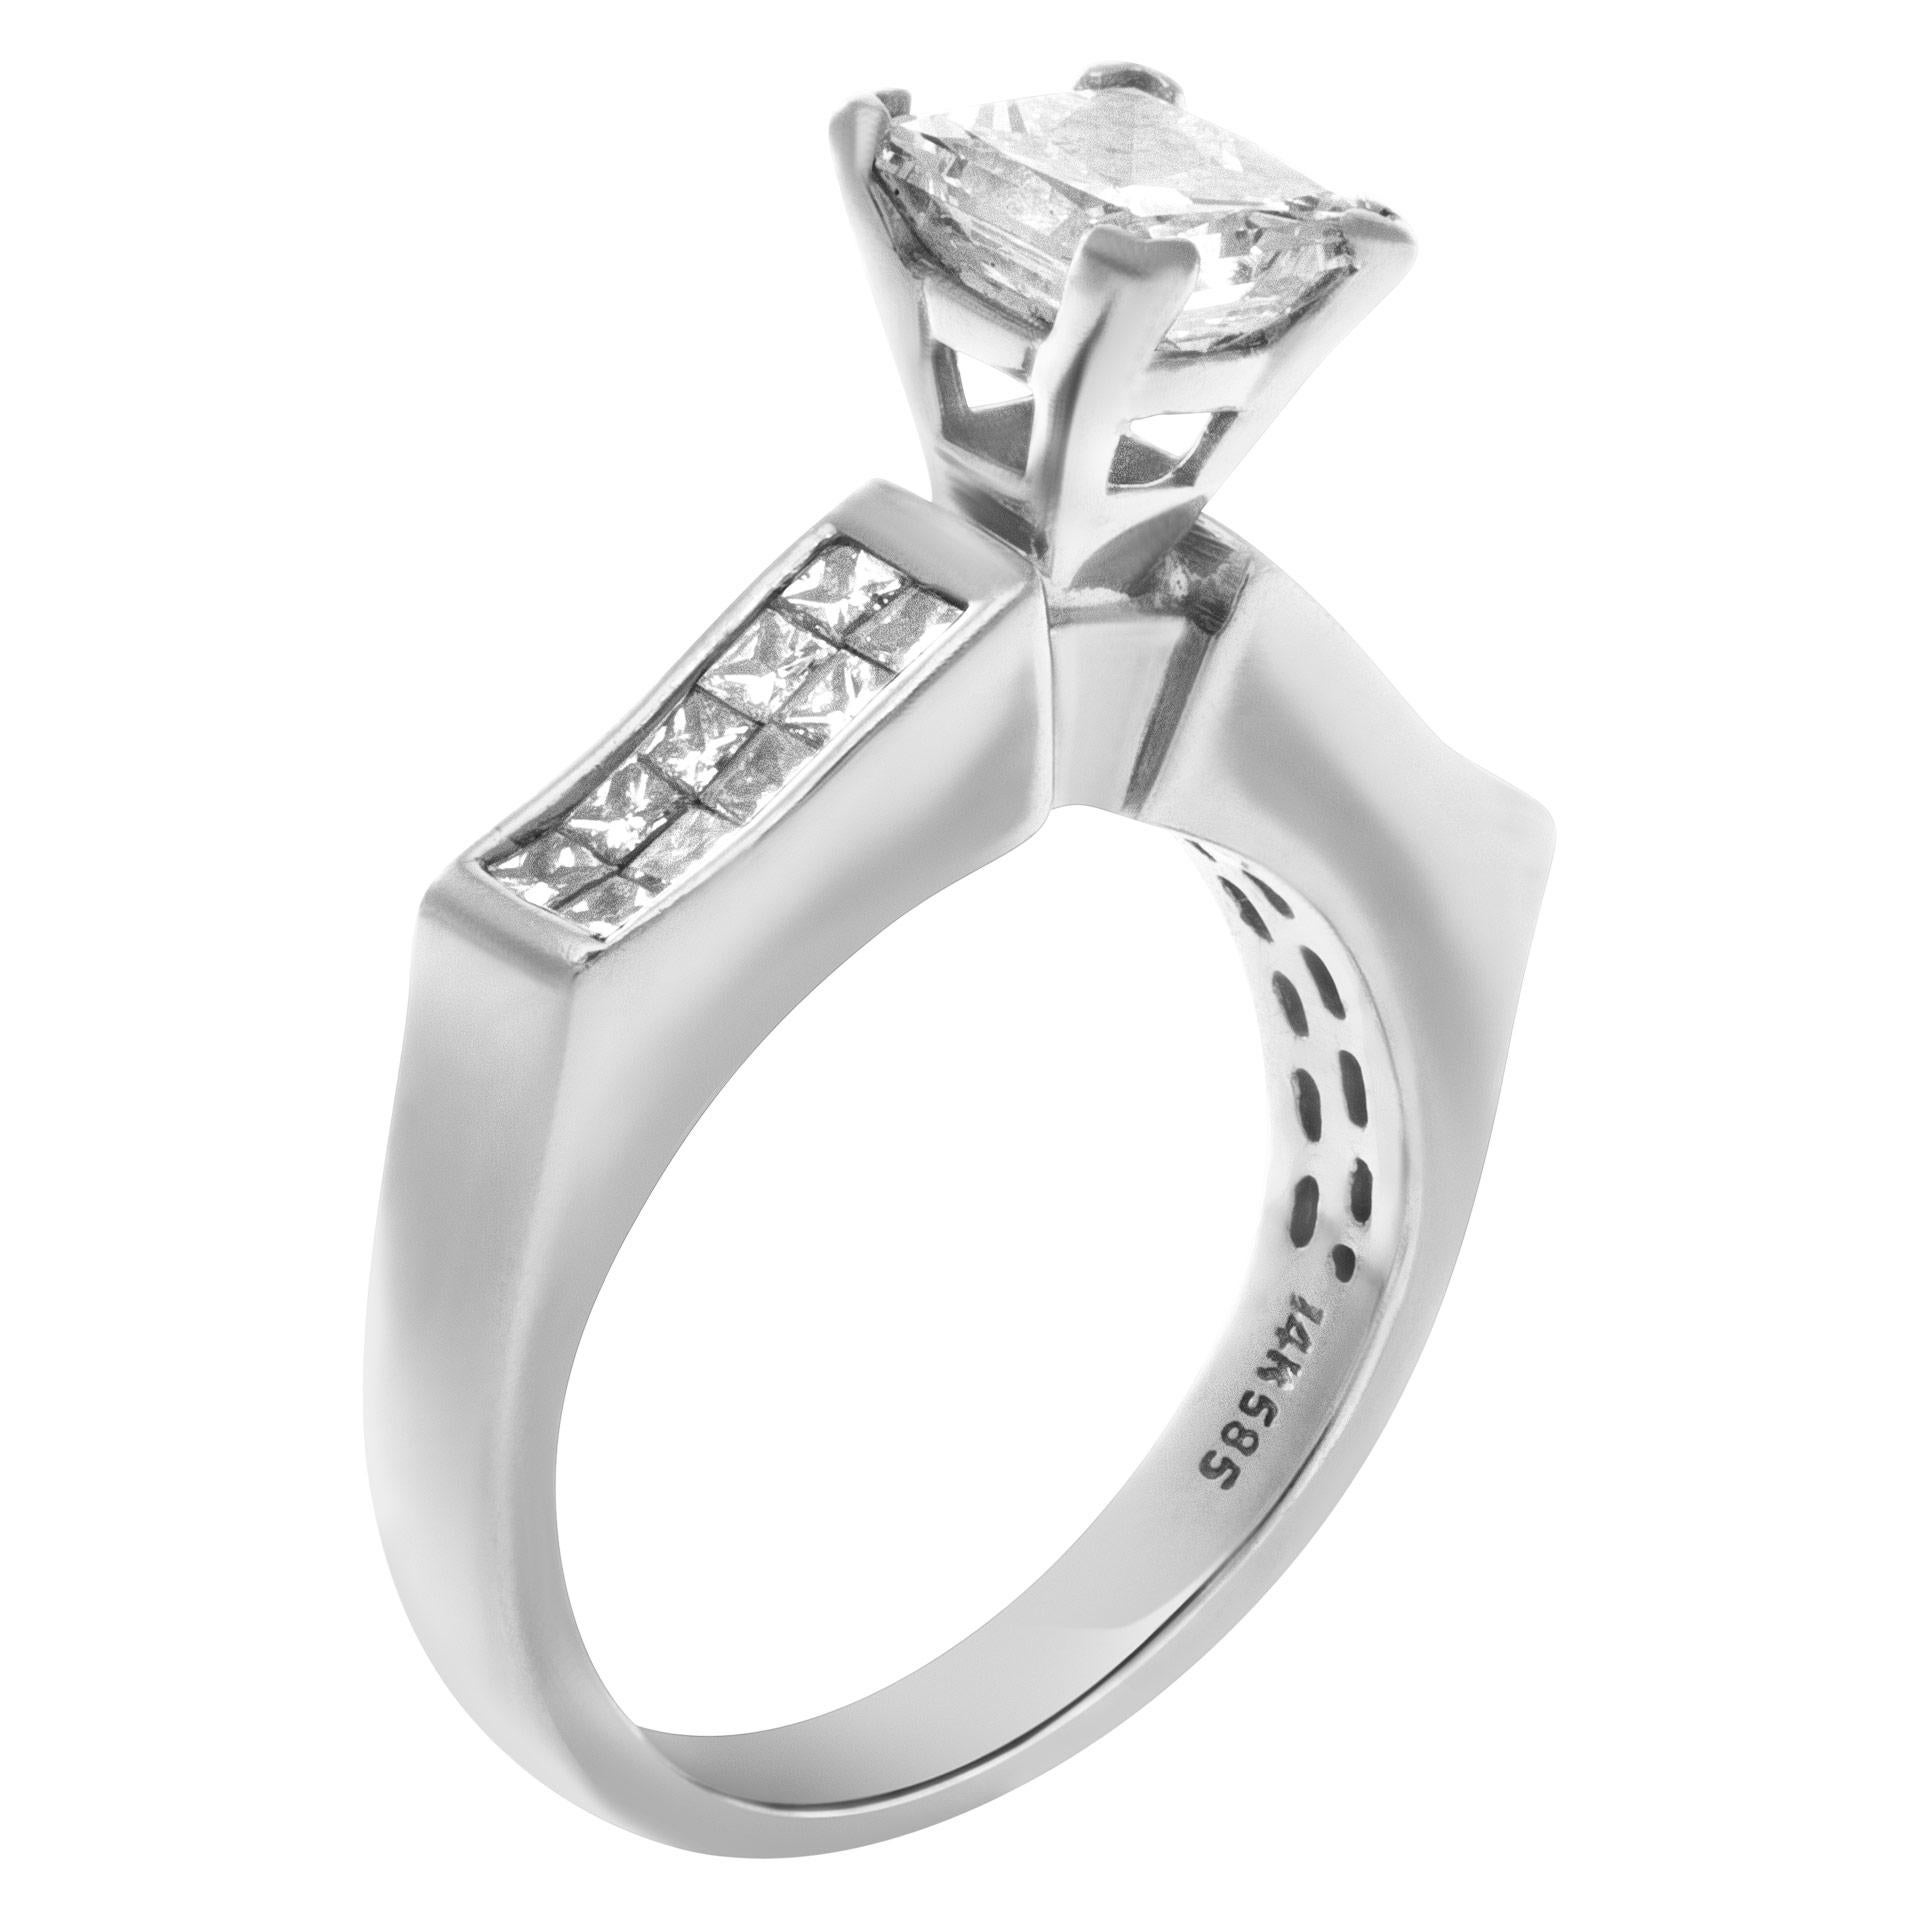 GIA certified diamond engagement ring with 1.01cts rectangular diamond F color SI2 clarity and appr.0.70cts in side princess cut diamond accents in 14k white gold. This GIA certified ring is currently size 3.75 and some items can be sized up or